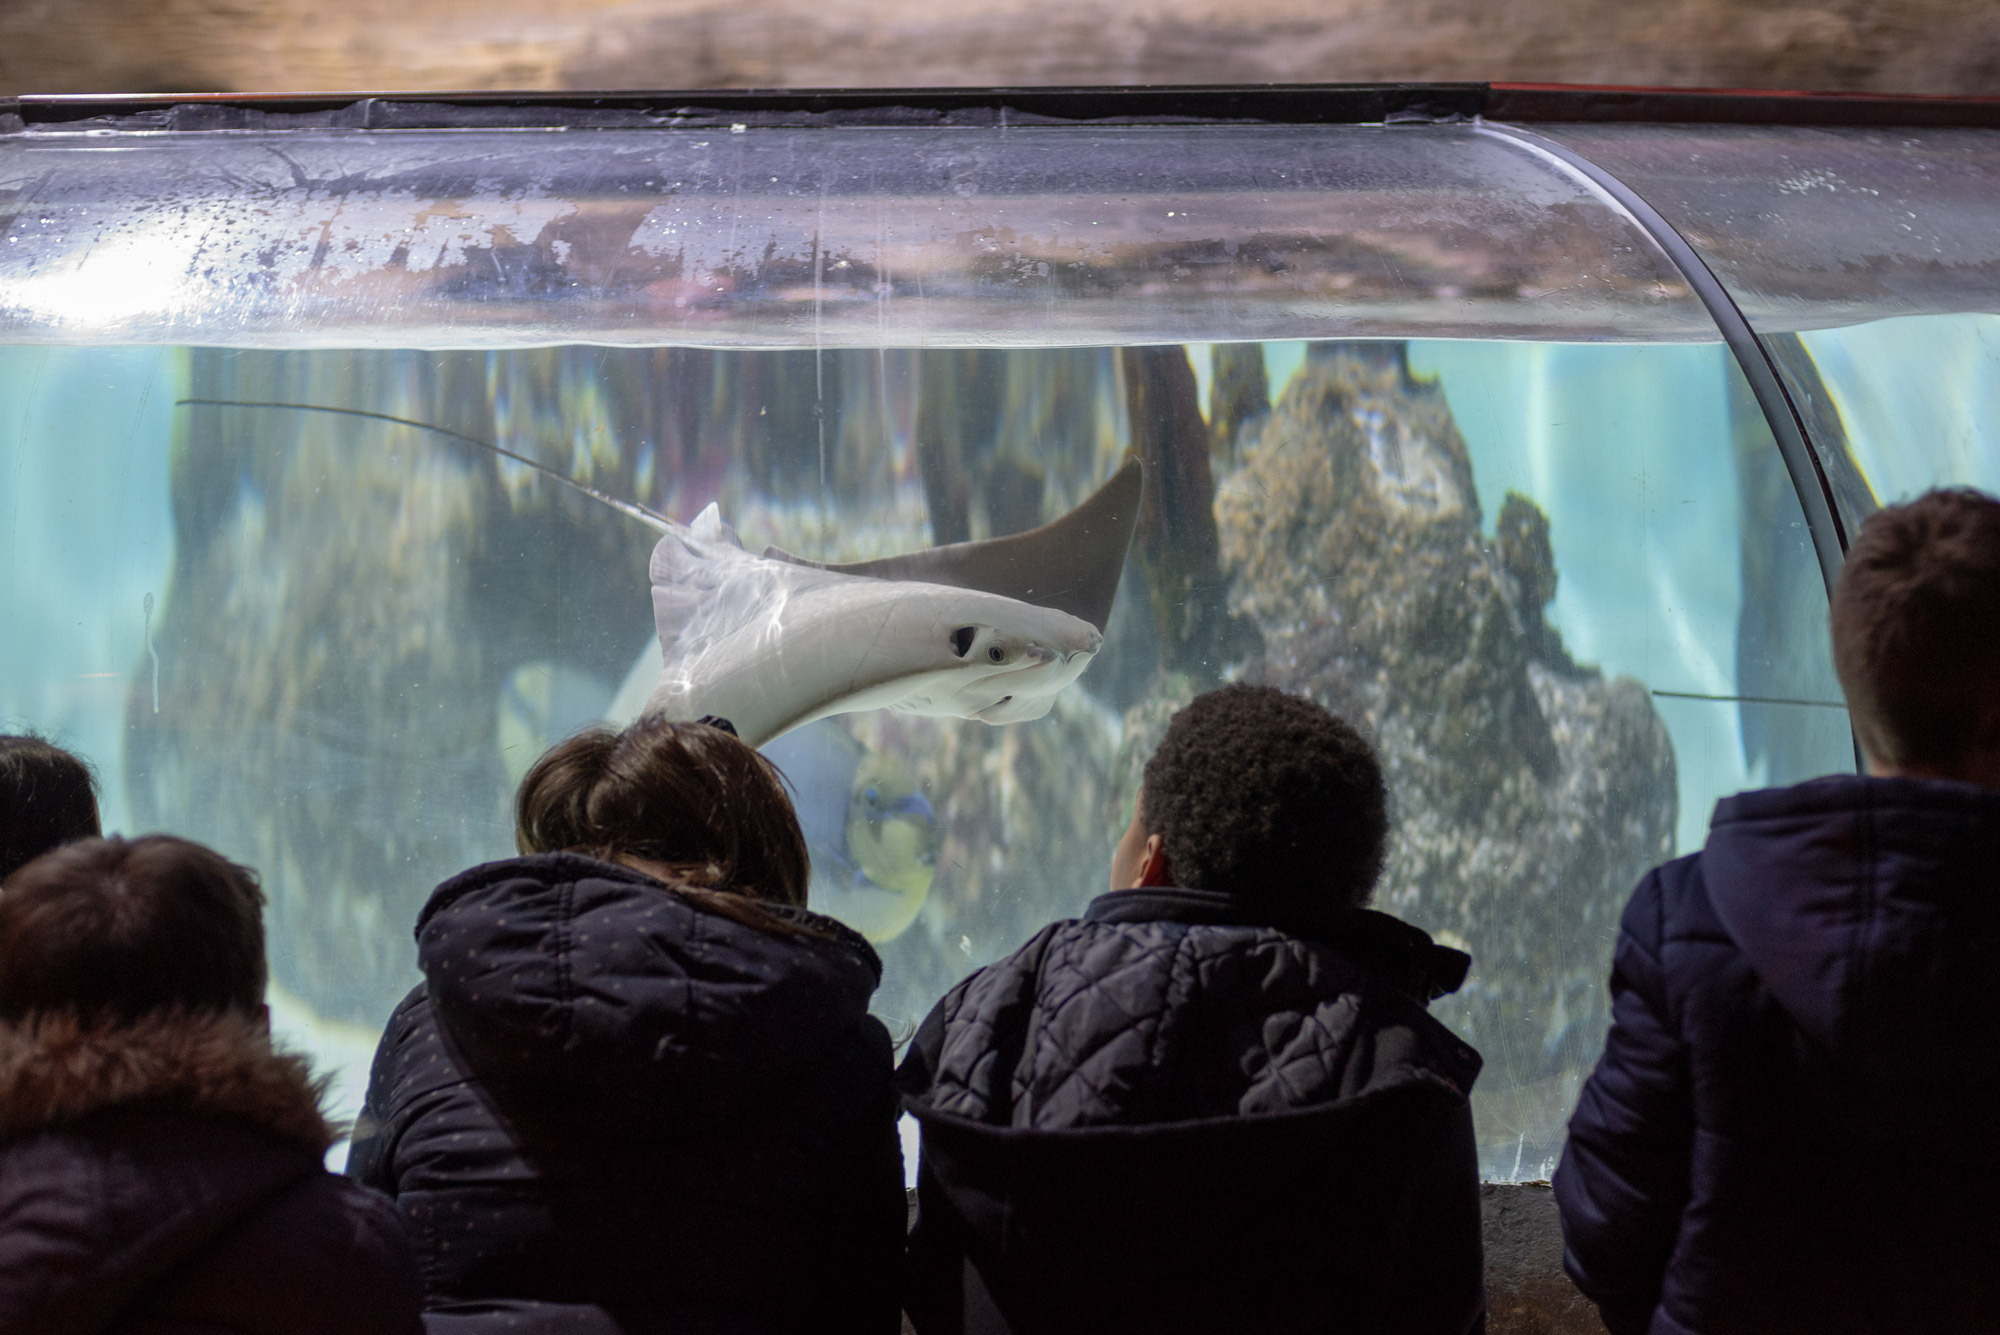 SEA LIFE Porto - Museums & Thematic Centres